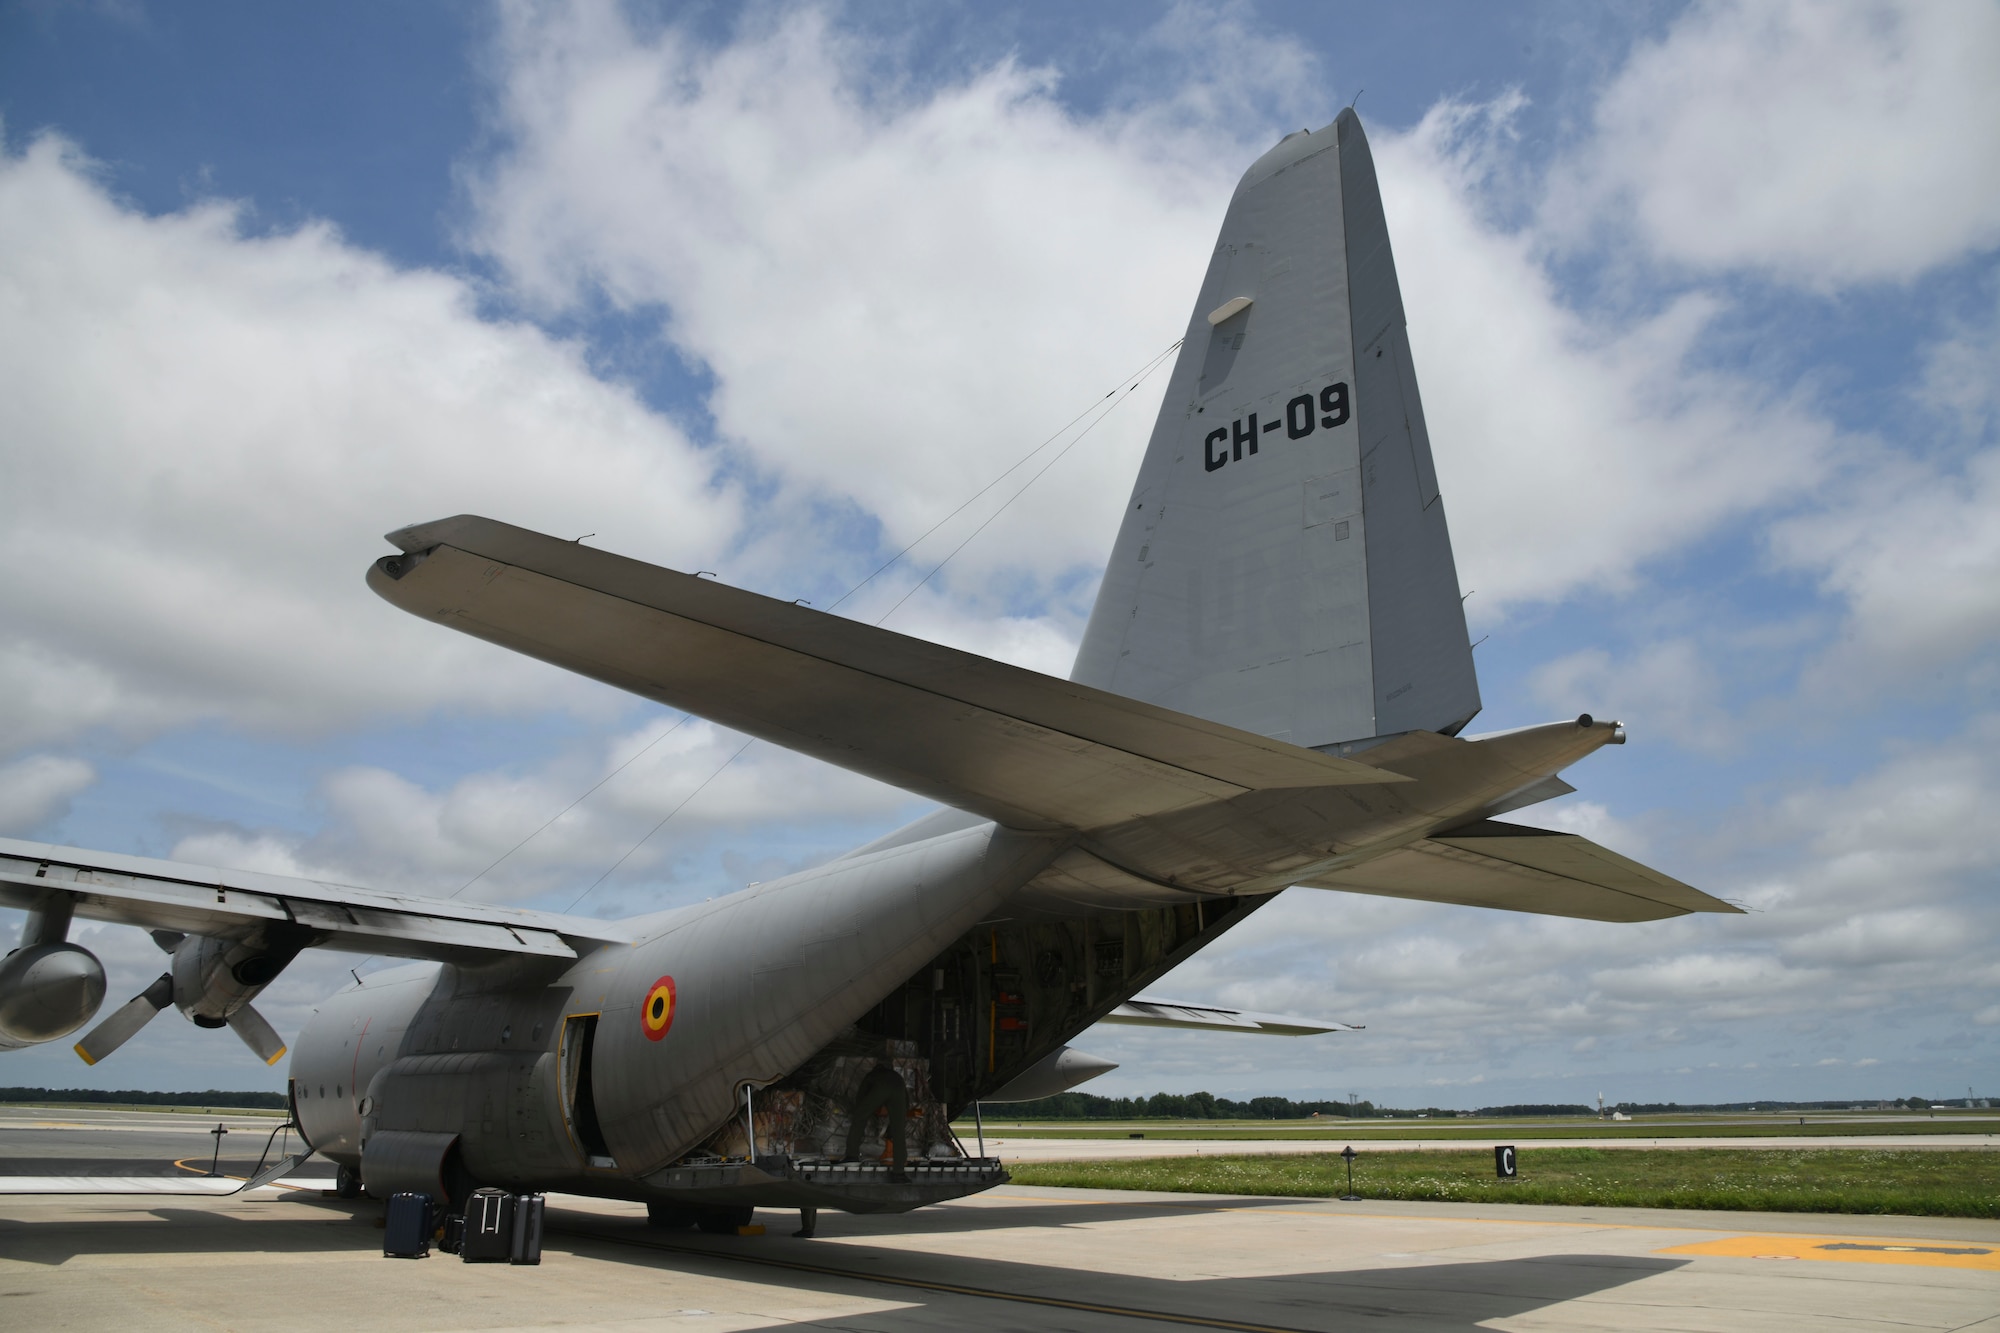 This operation strengthens the U.S. relationship with the Kingdom of Belgium, a key NATO ally, while similar operations enhance partnerships and alliances, which are crucial to fortifying global security and stability. Due to its strategic location, Dover AFB regularly supports foreign military sales operations.